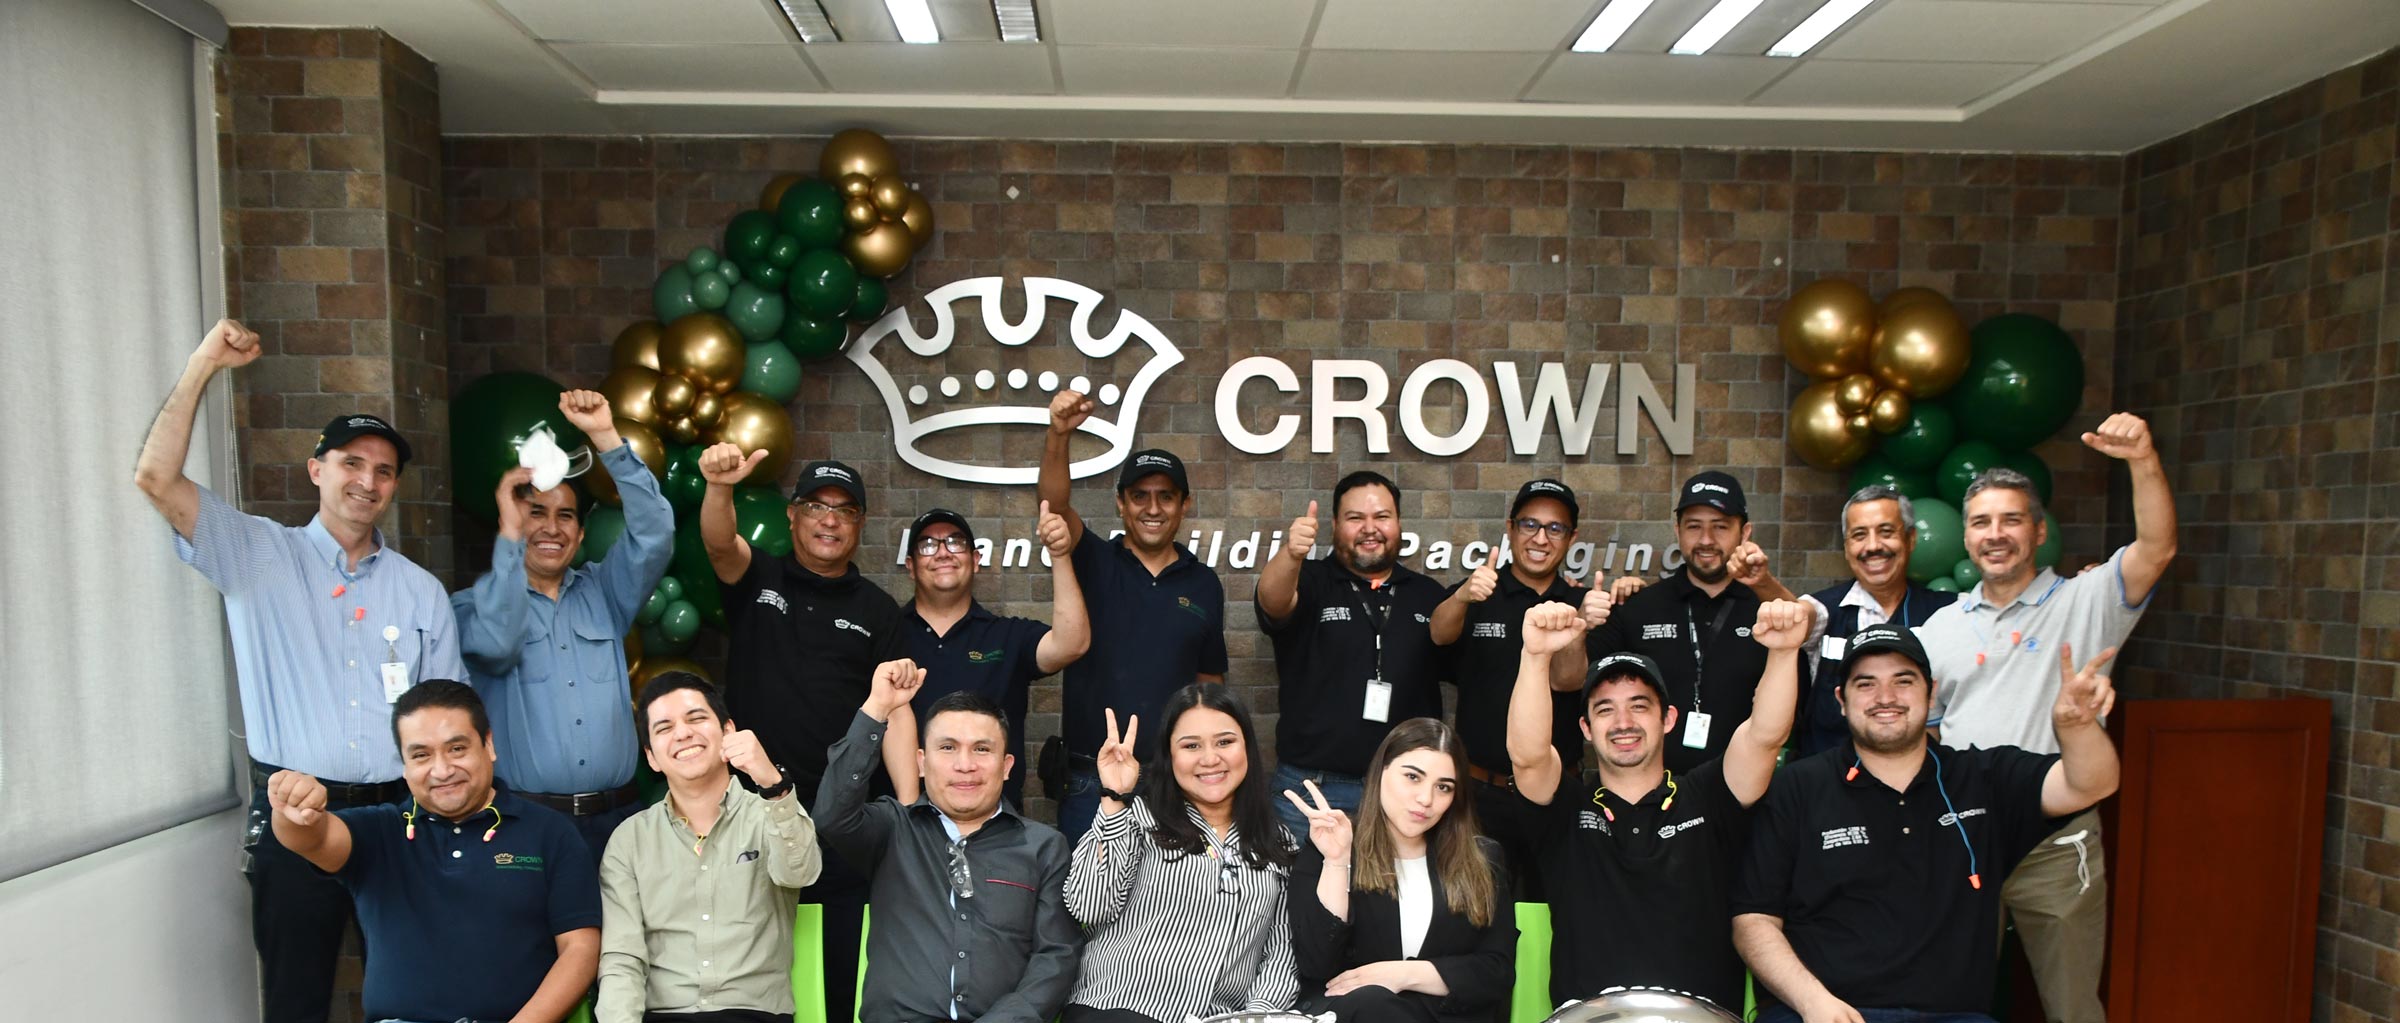 A group of Crown employees in jeans and collared shirts posing for a picture in front of a Crown sign.